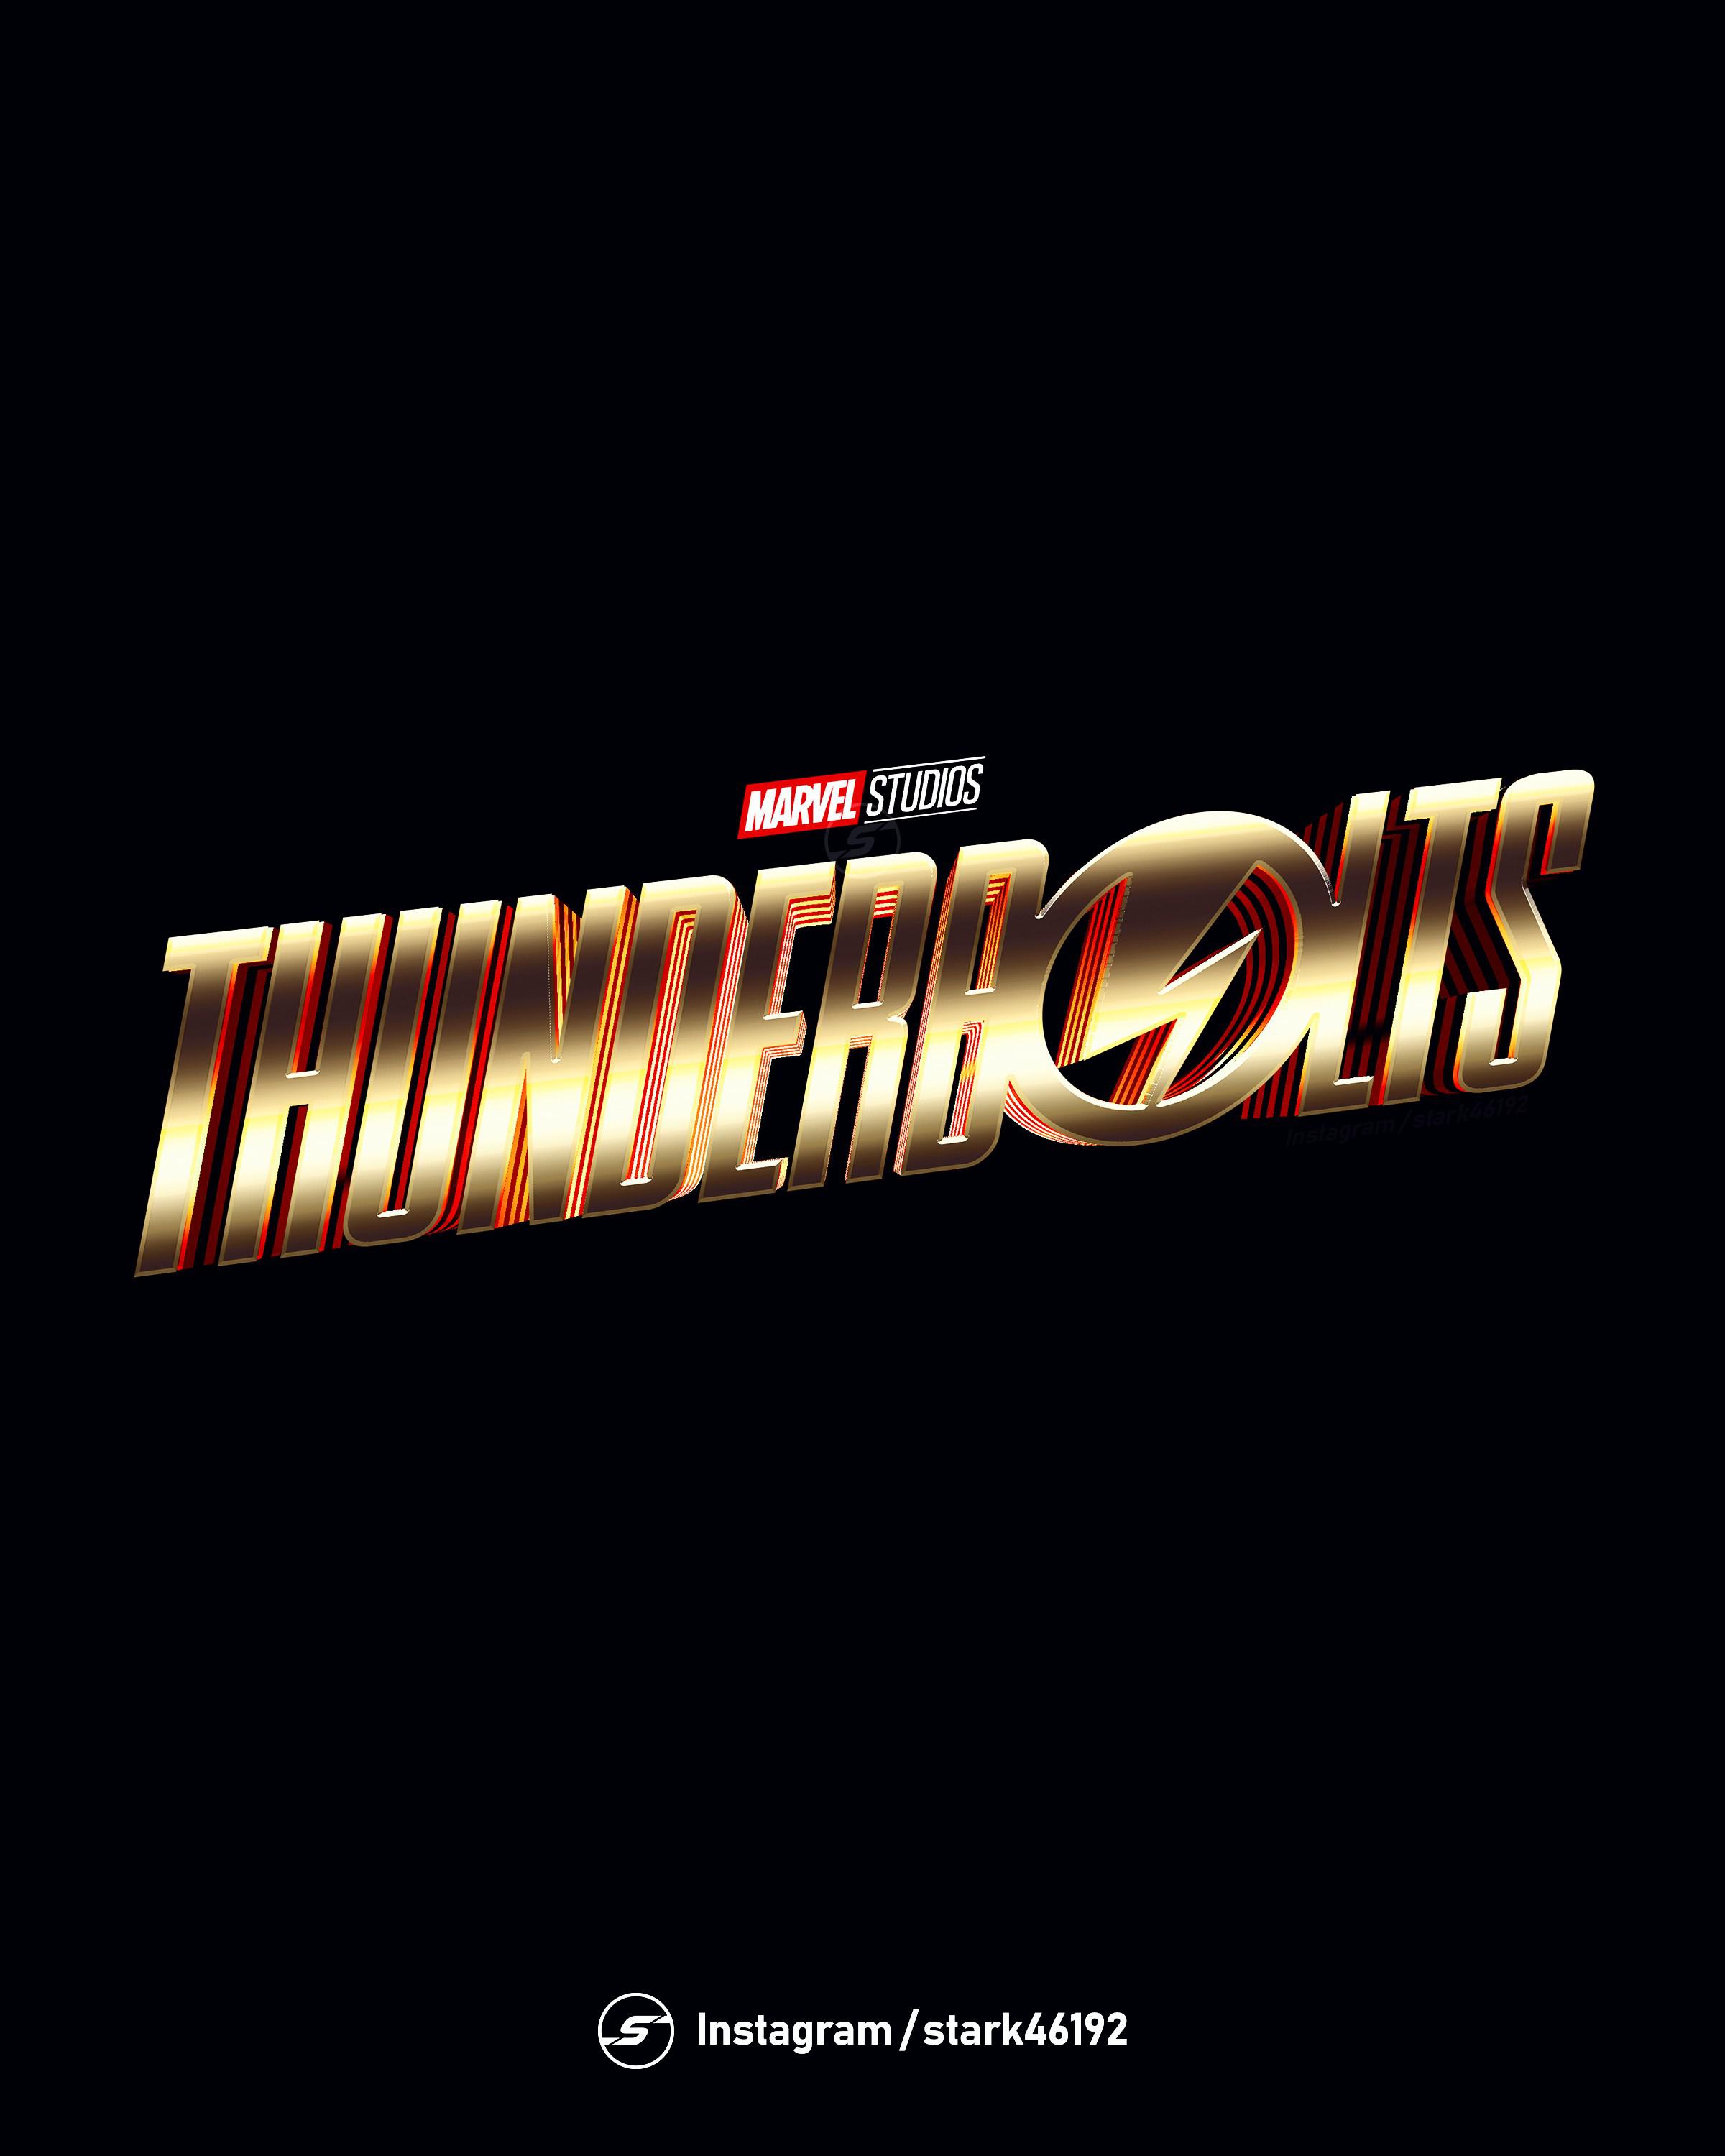 Thunderbolts, Marvel Cinematic Universe Wiki